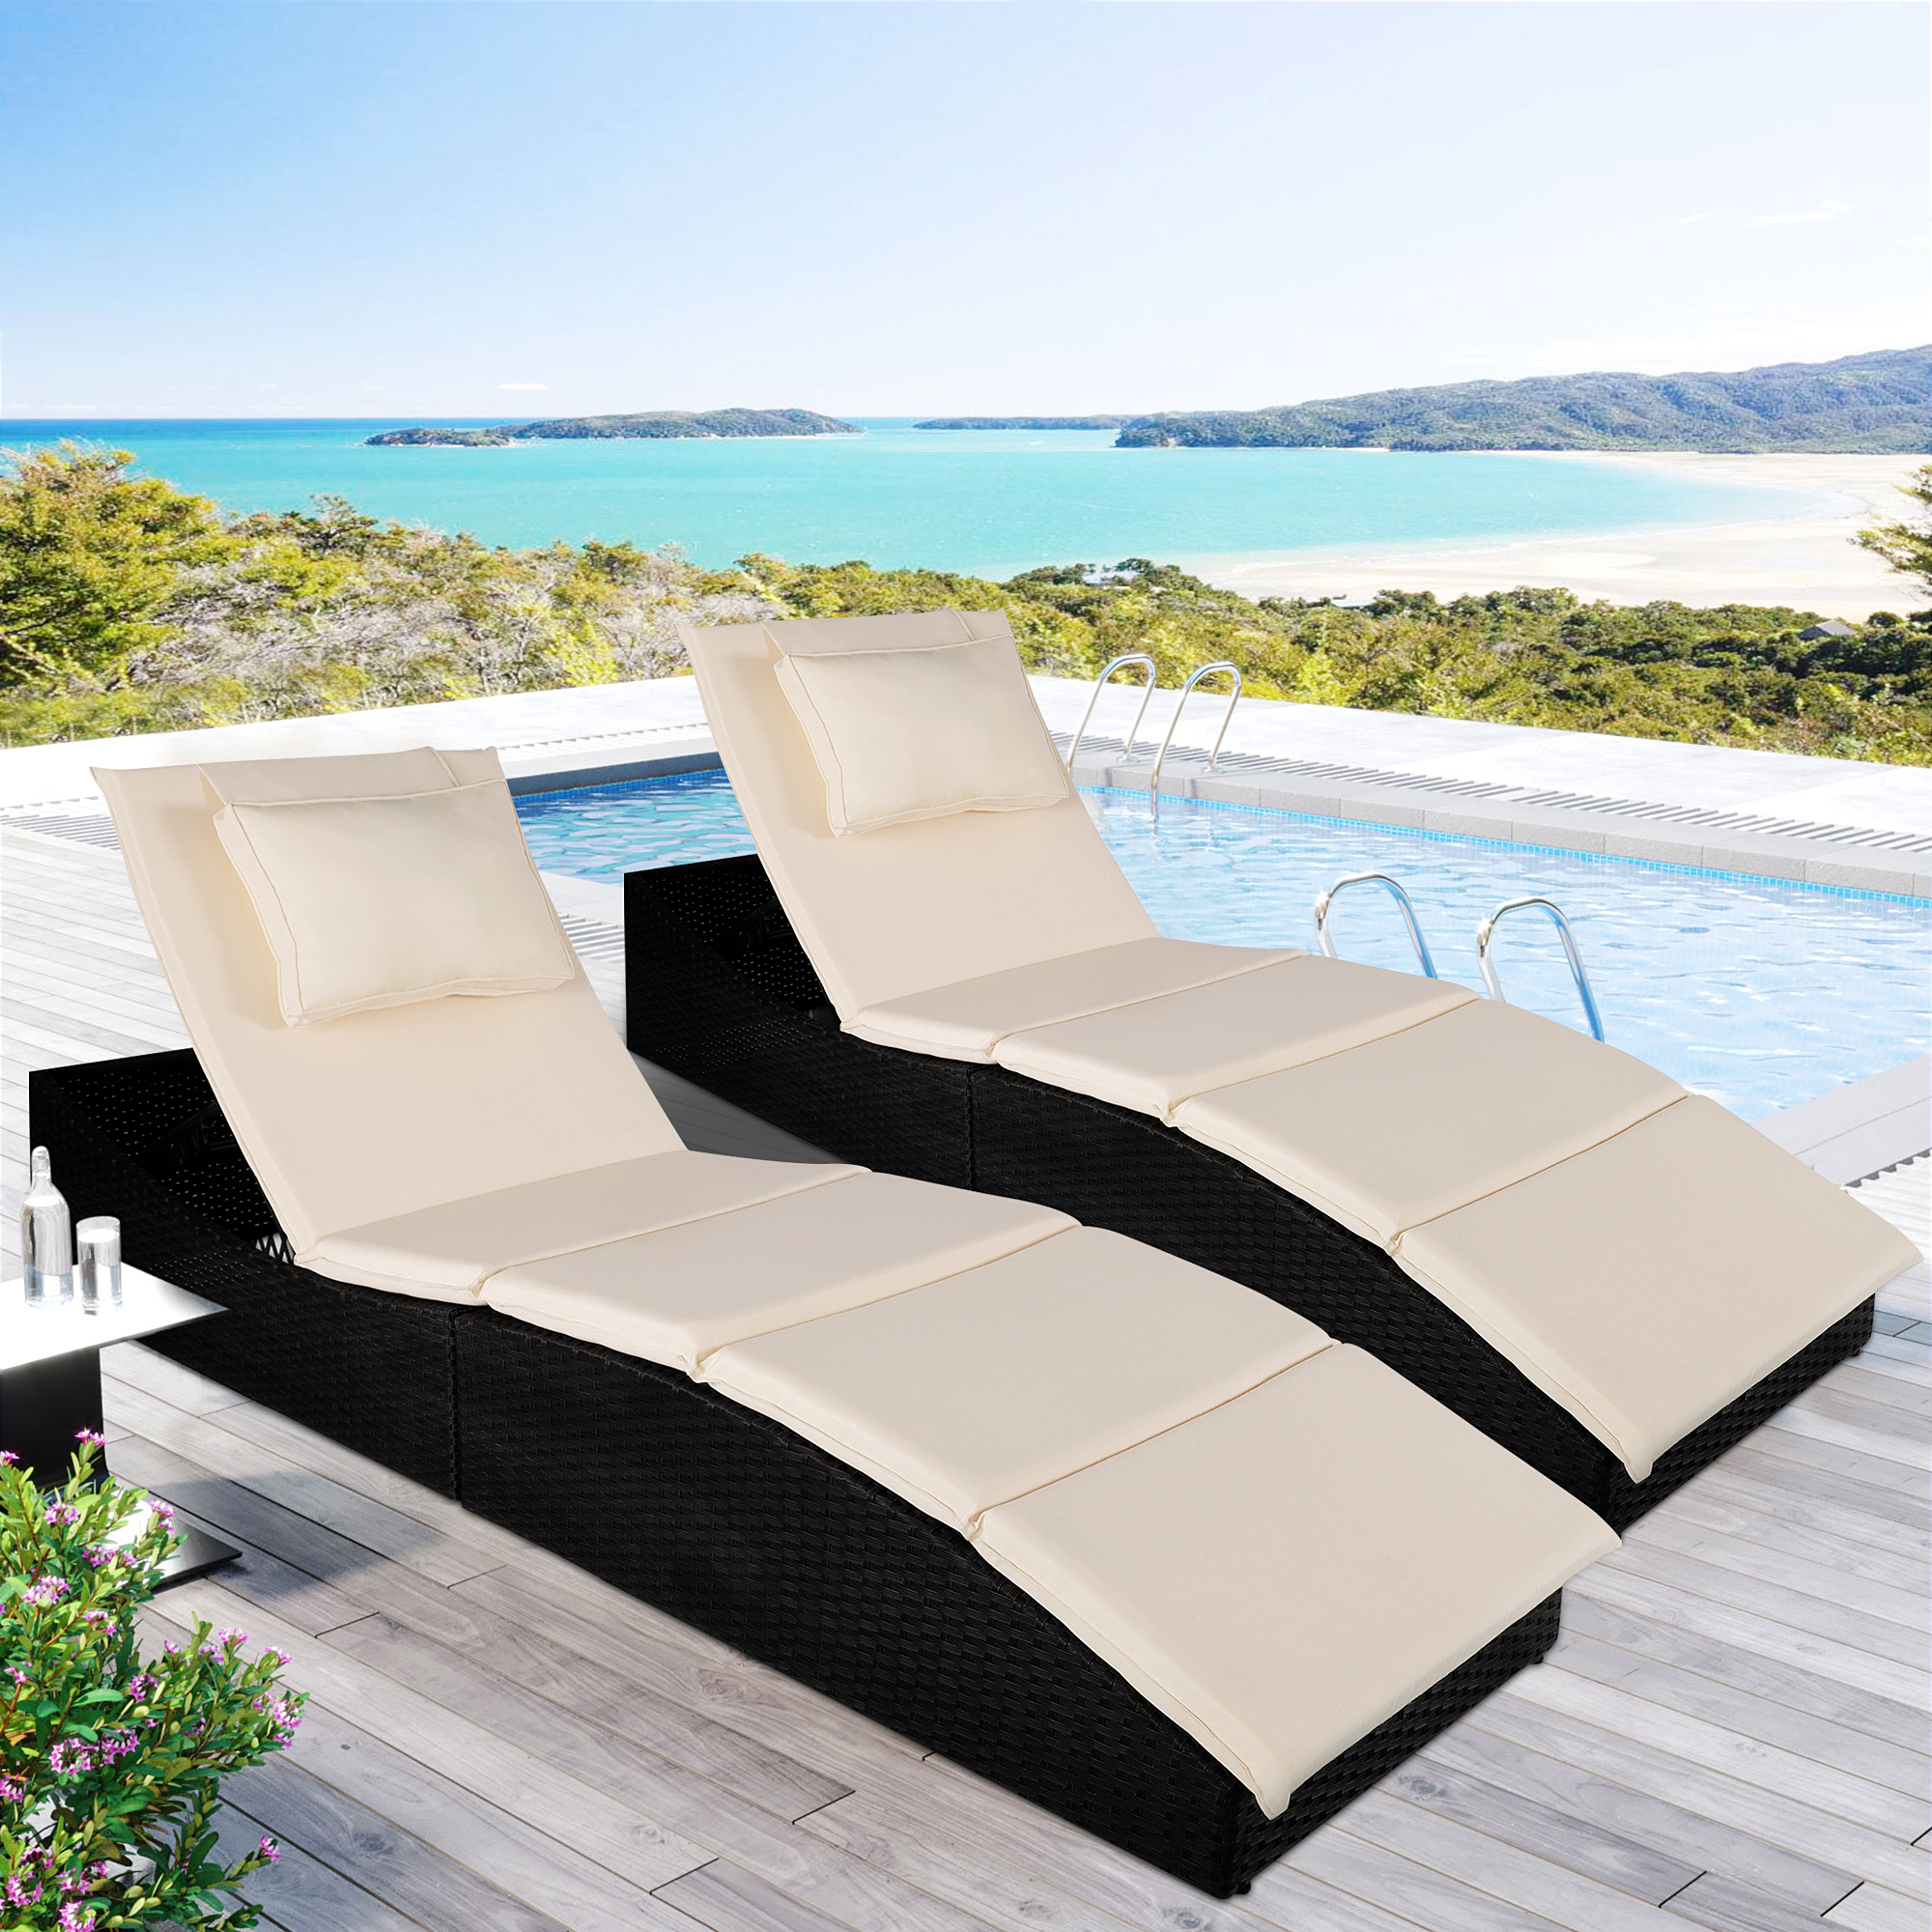 2 Pcs Rattan Patio Sun Lounge, Outdoor Lounge Chair with 5 Different Slopes, Folding Chaise Lounge Chair with Cushion, Patio PE Rattan Wicker Reclining Chair for Poolside Deck Backyard Beach, T251 - image 2 of 9